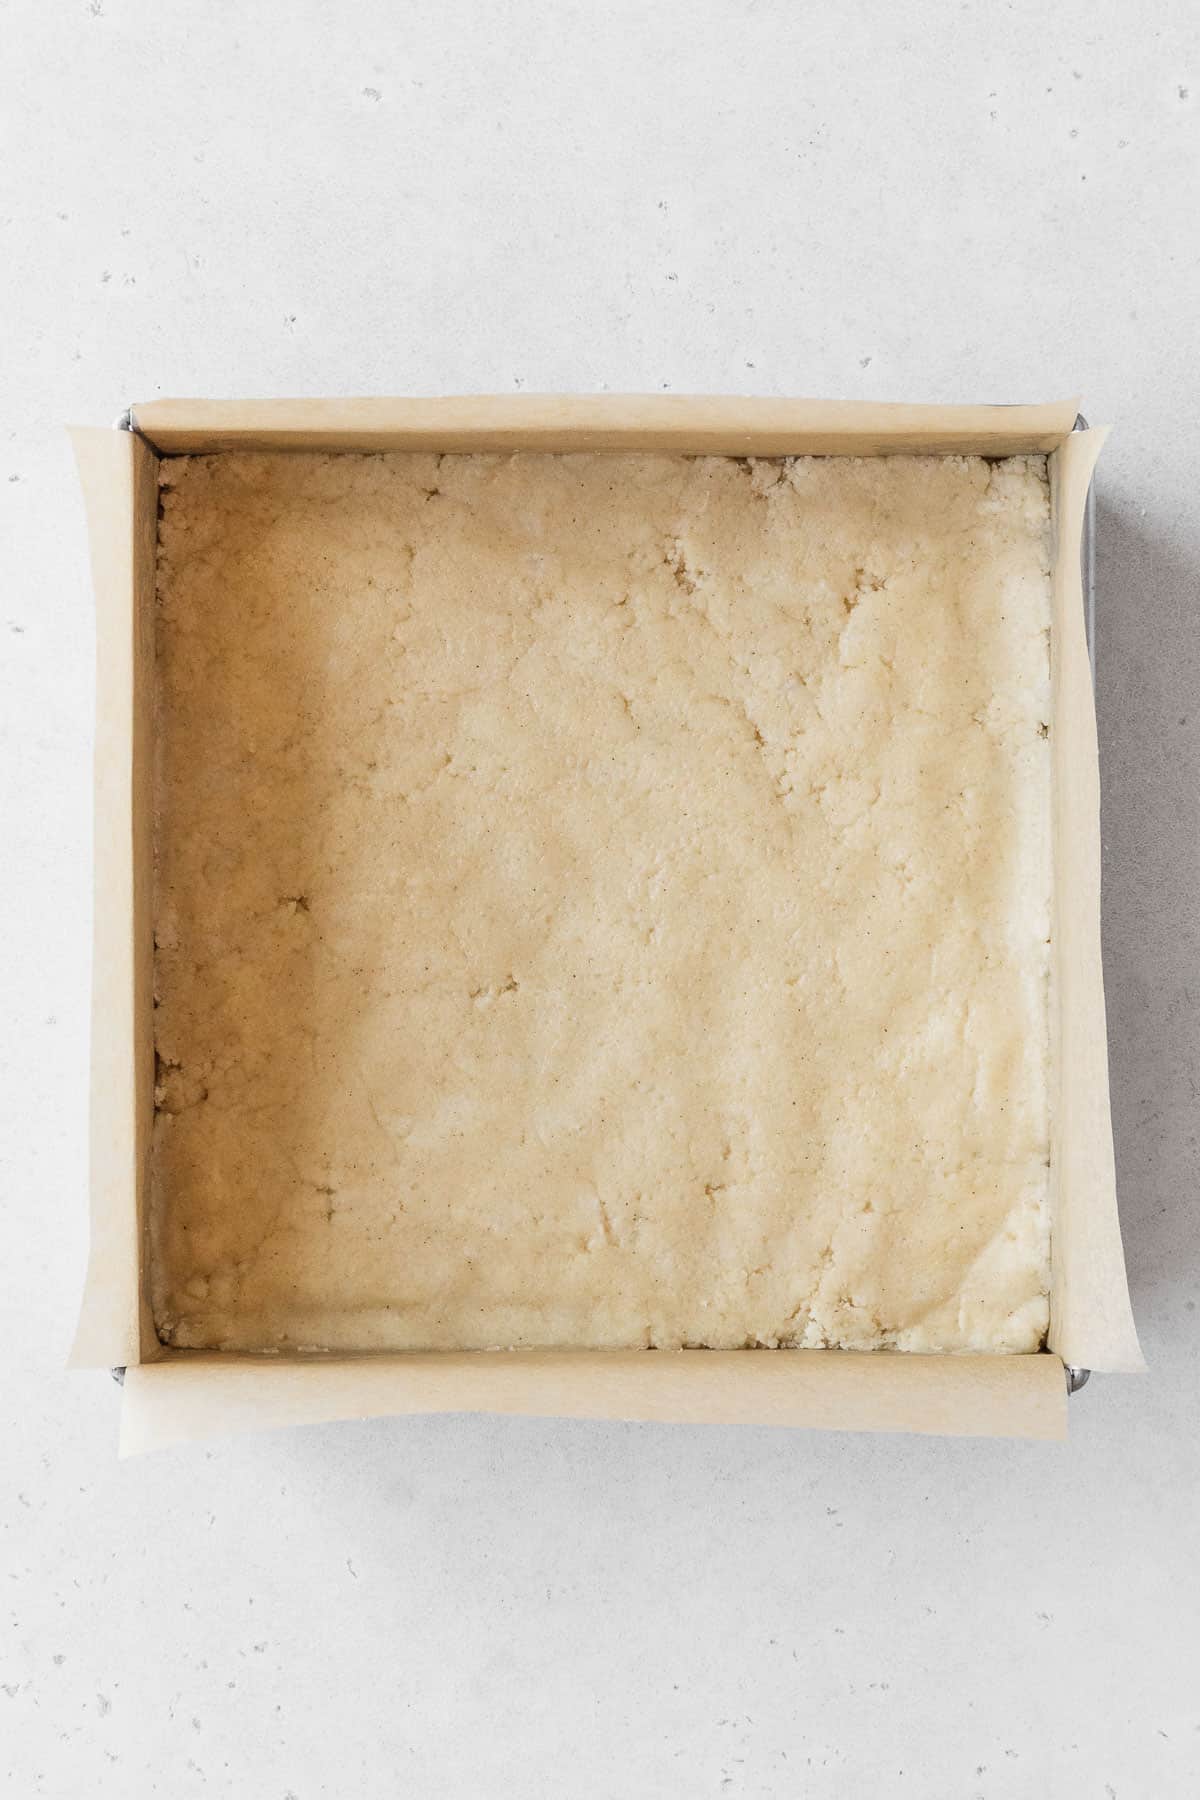 A metal baking pan of the dairy-free shortbread before baking.